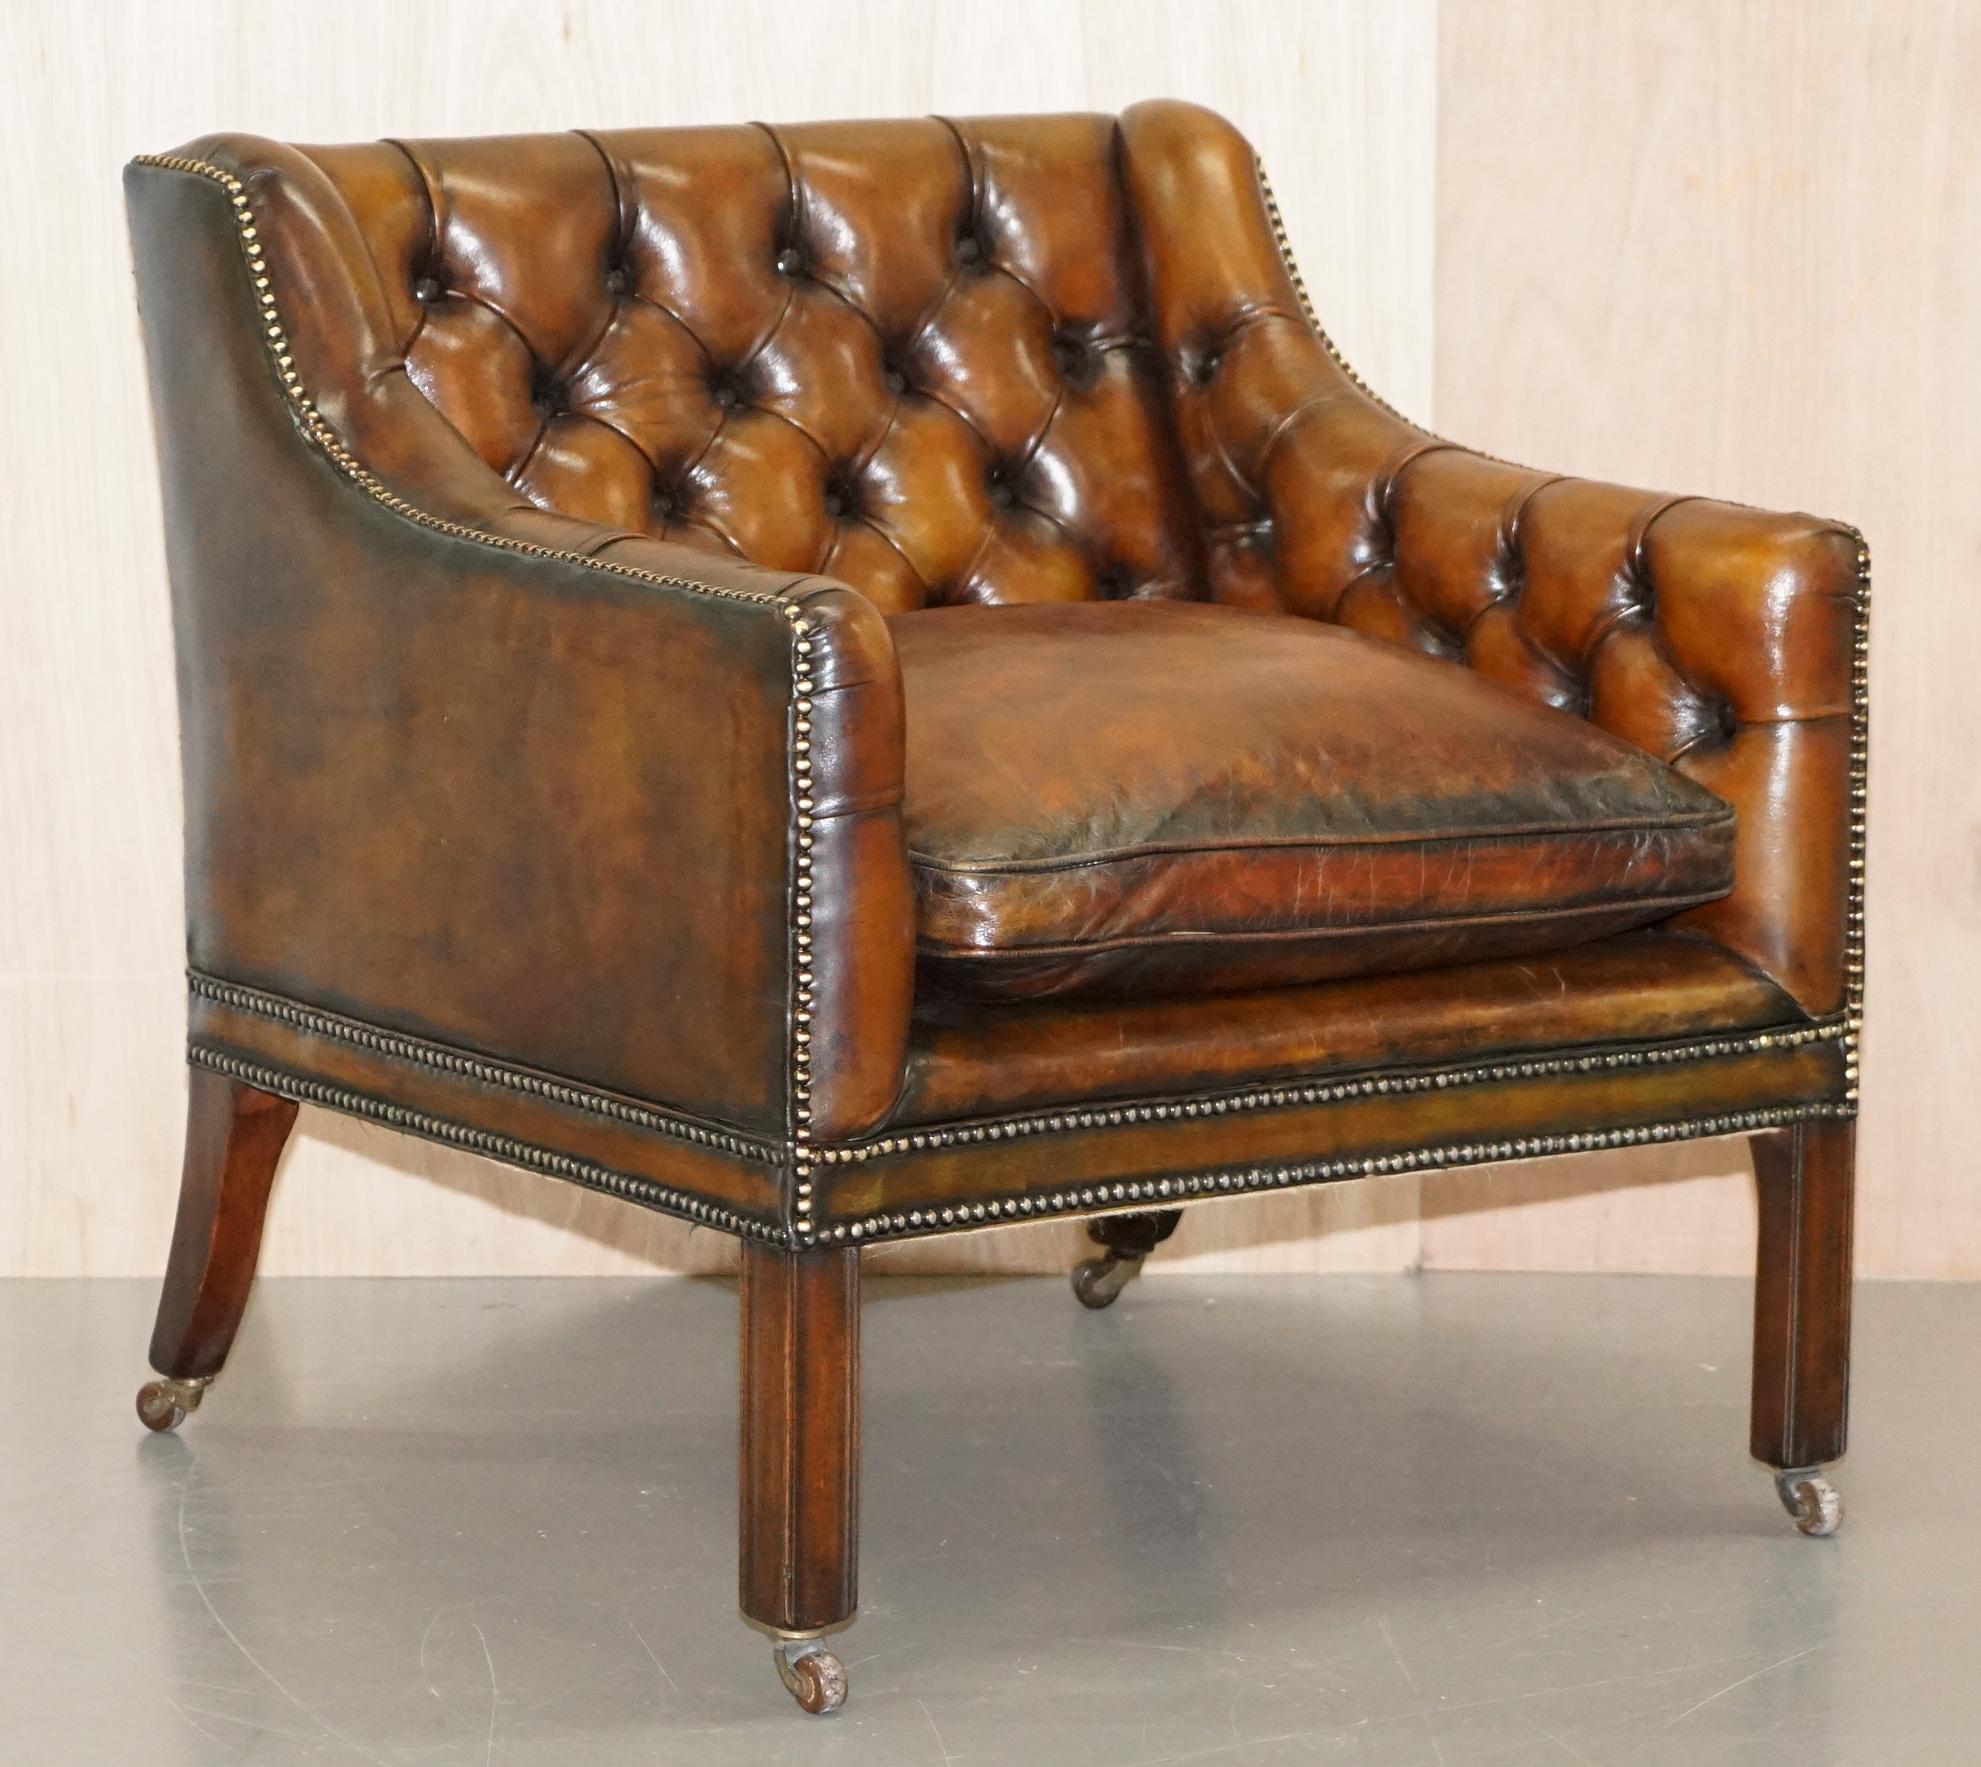 We are delighted to offer for sale this very rare pair of Lutyen’s Viceroy style Chesterfield fully restored cigar brown leather armchairs 

A very rare model chair, originally made by Lutyen’s in the latter part of the Victorian era, the family